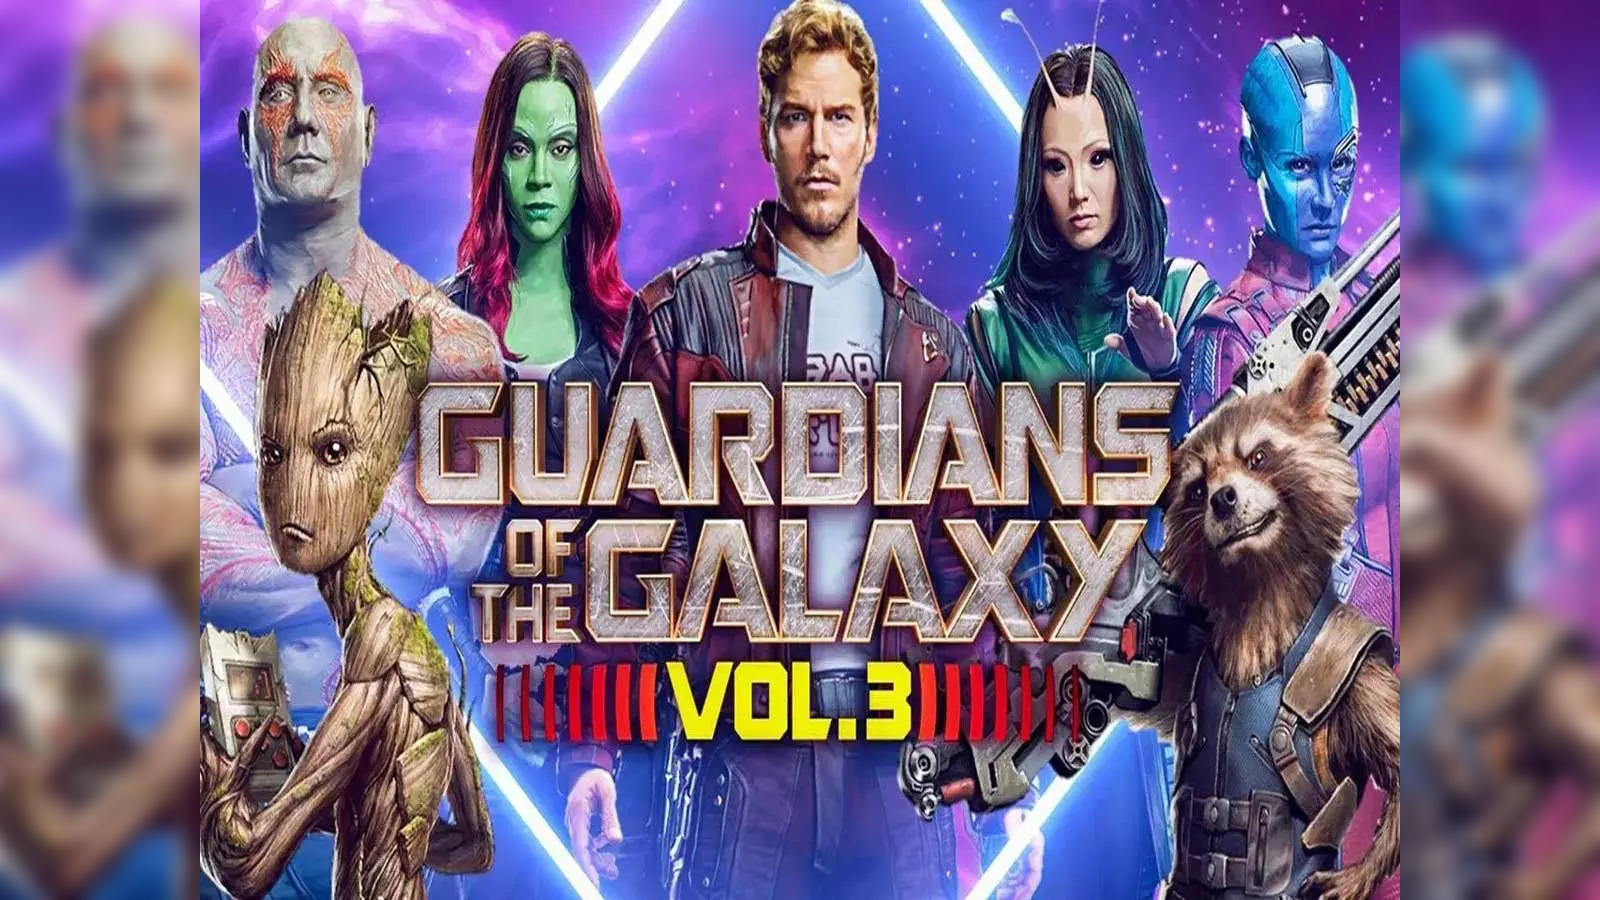 Guardians of the Galaxy Vol. 3' is one of the greatest Marvel movies 